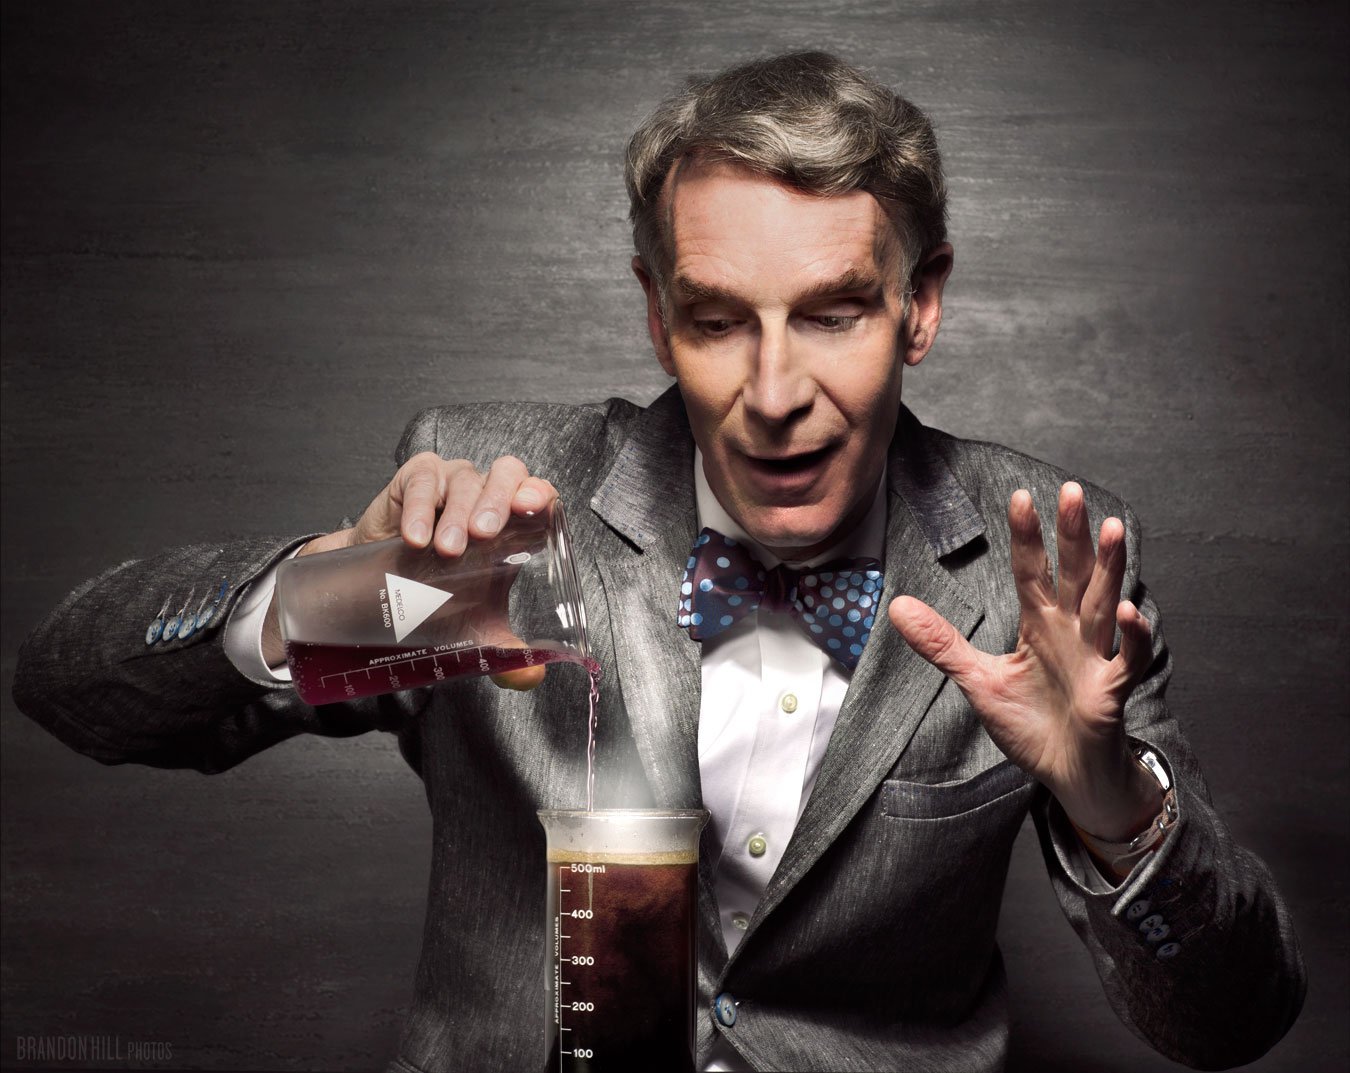 Happy Birthday to Bill Nye \The Science Guy\ who turns 62 today! 